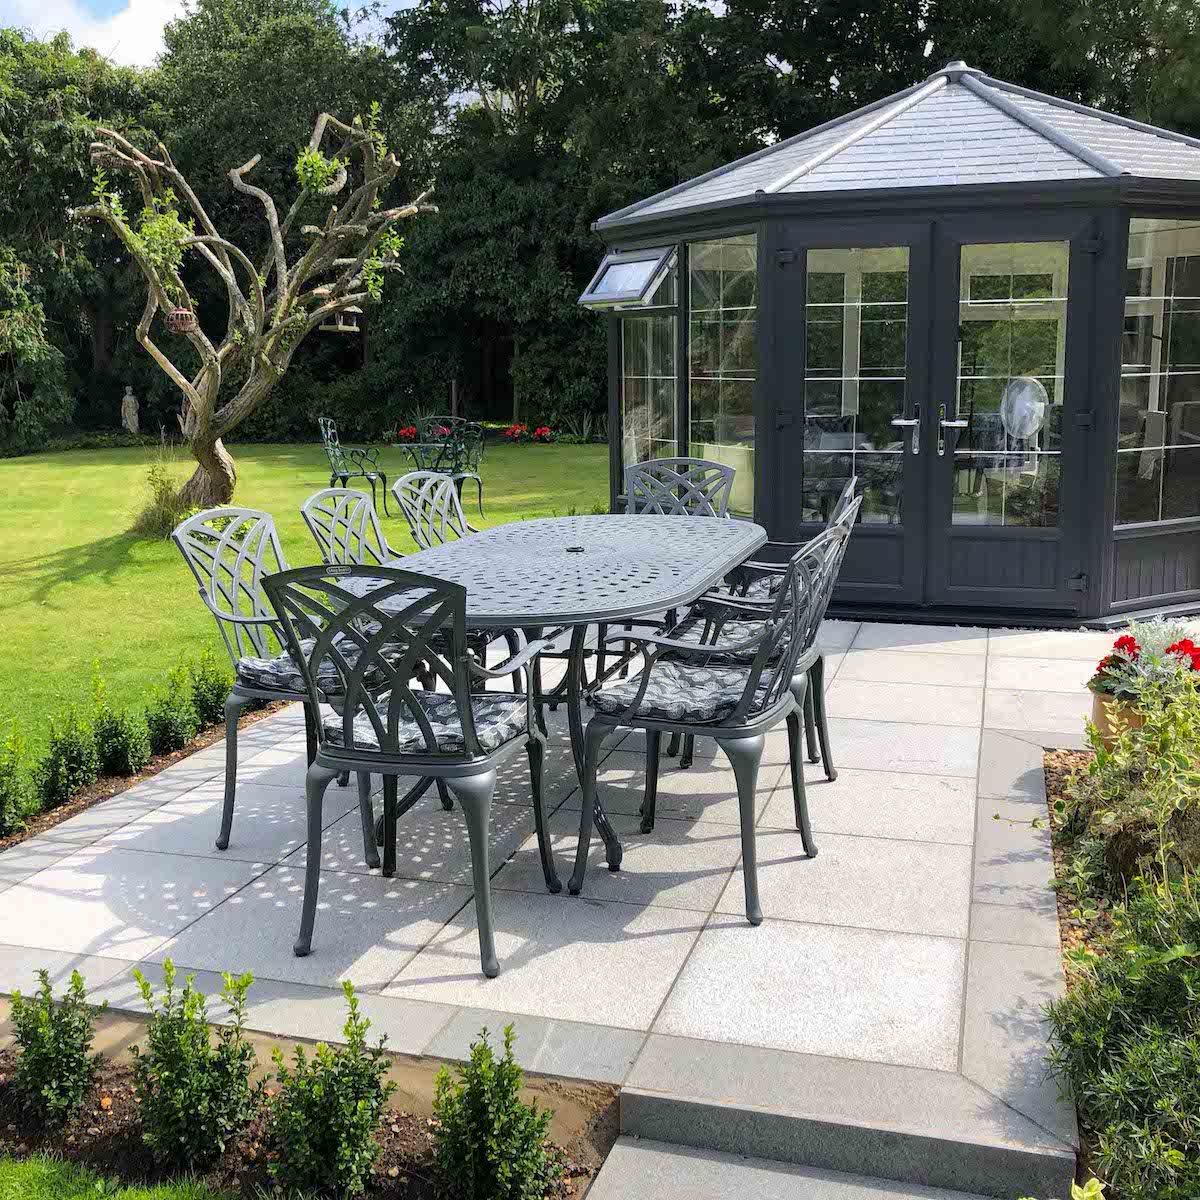 6-seater garden furniture sets from Lazy Susan